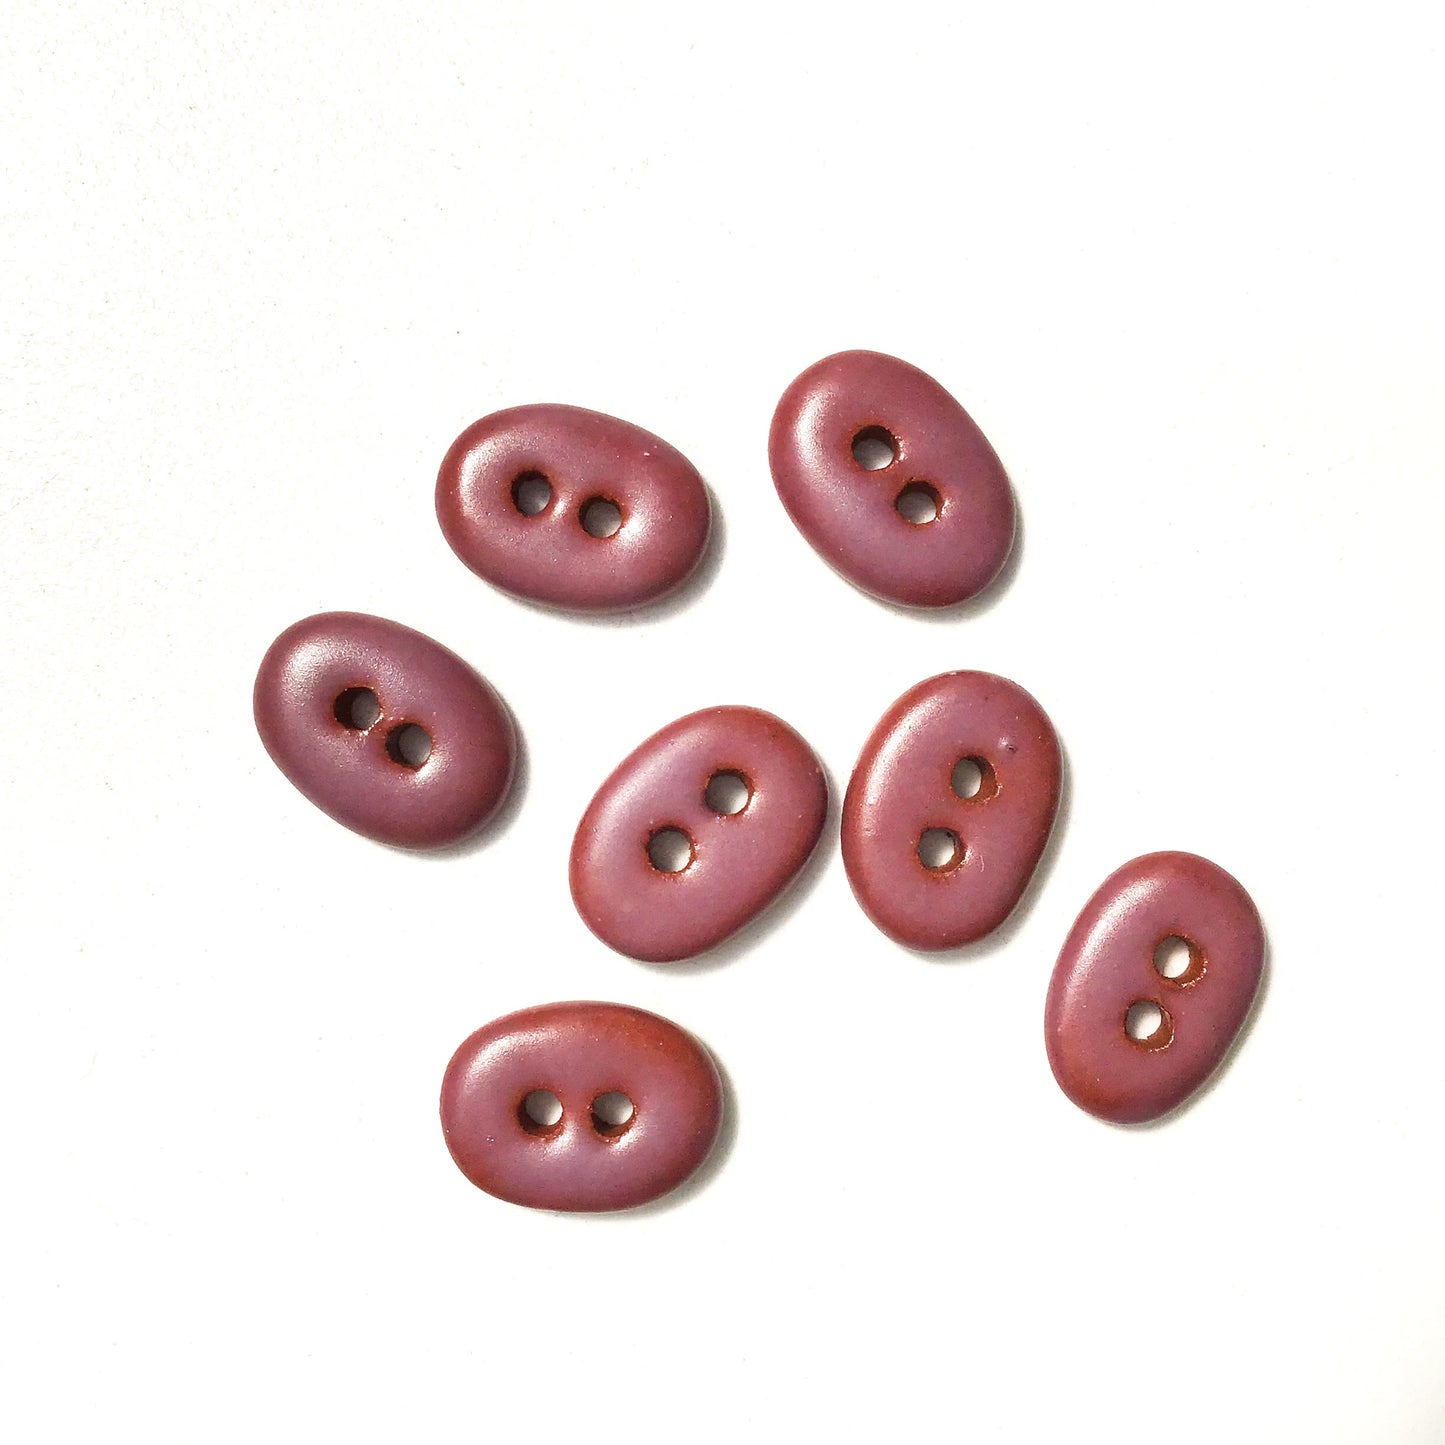 Matte Plum Ceramic Buttons - Small Oval Clay Buttons - 7/16" x 9/16" - 6 Pack or 7 Pack